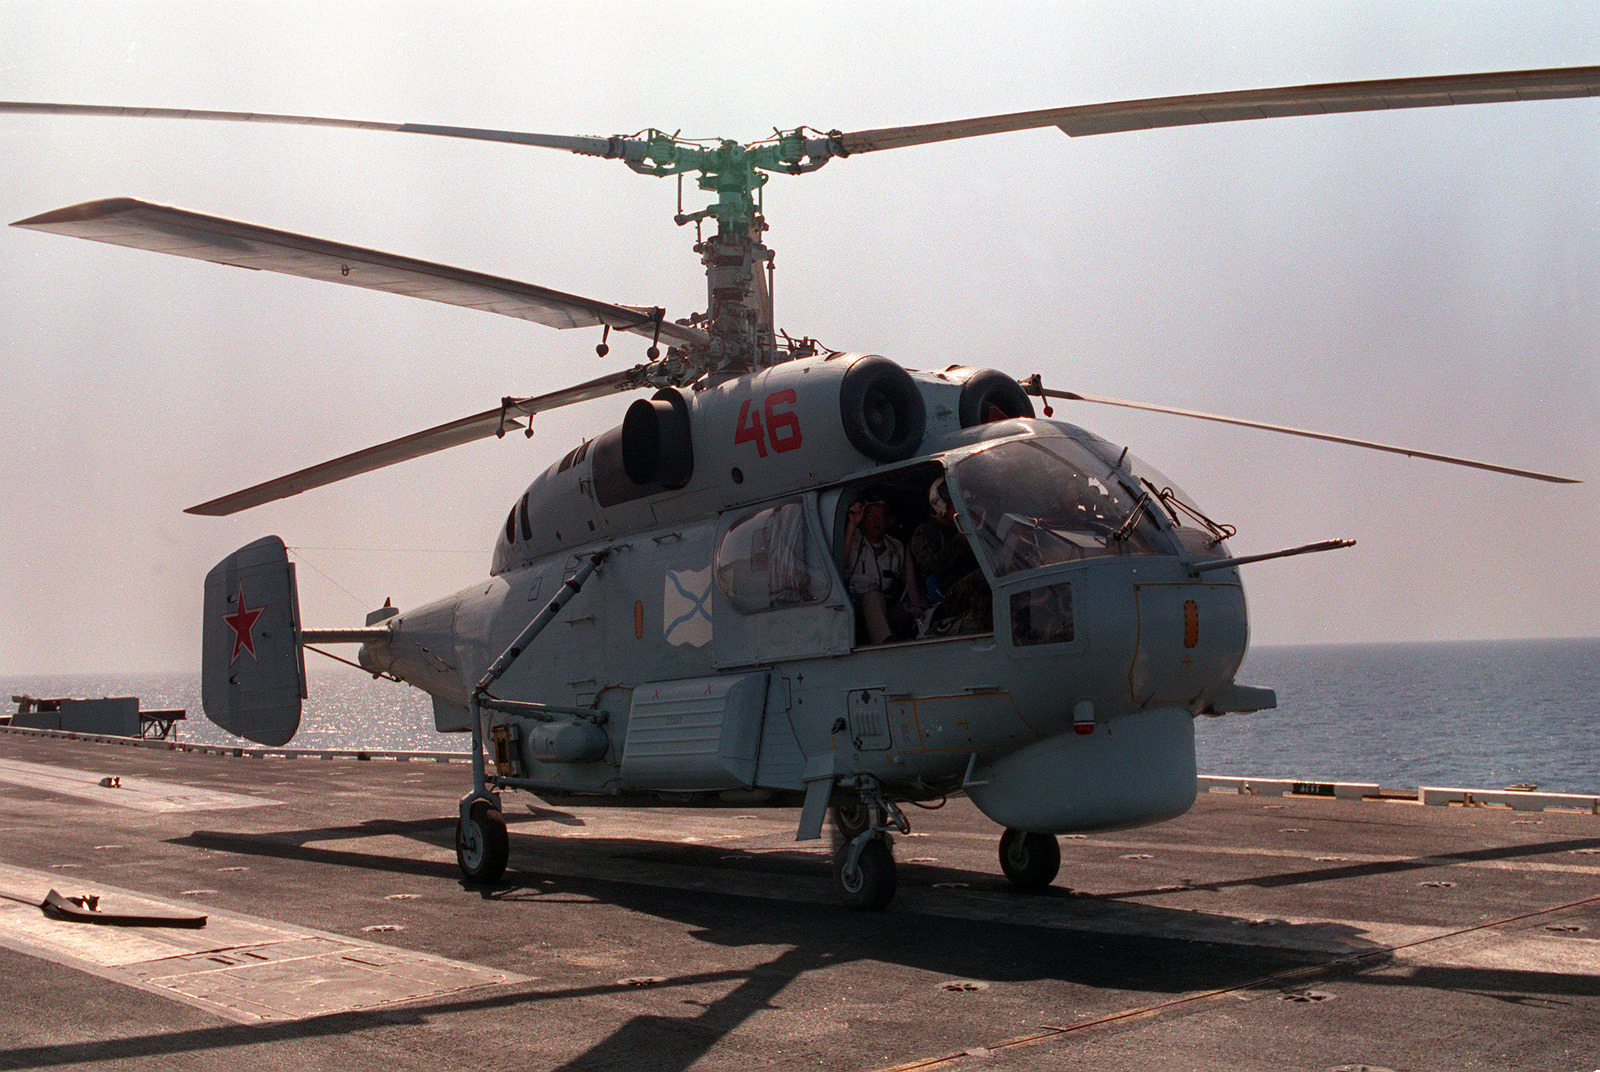 A Russian Ka-27 Helix helicopter prepares to take off from the flight deck of the aircraft carrier USS RANGER (CV-61) following a visit to the ship by helicopter crew members from the guided missile destroyer Admiral Vinogradov (BPK-554). Both the Vinogradov and RANGER are part of a multinational naval force participating in exercises in the region